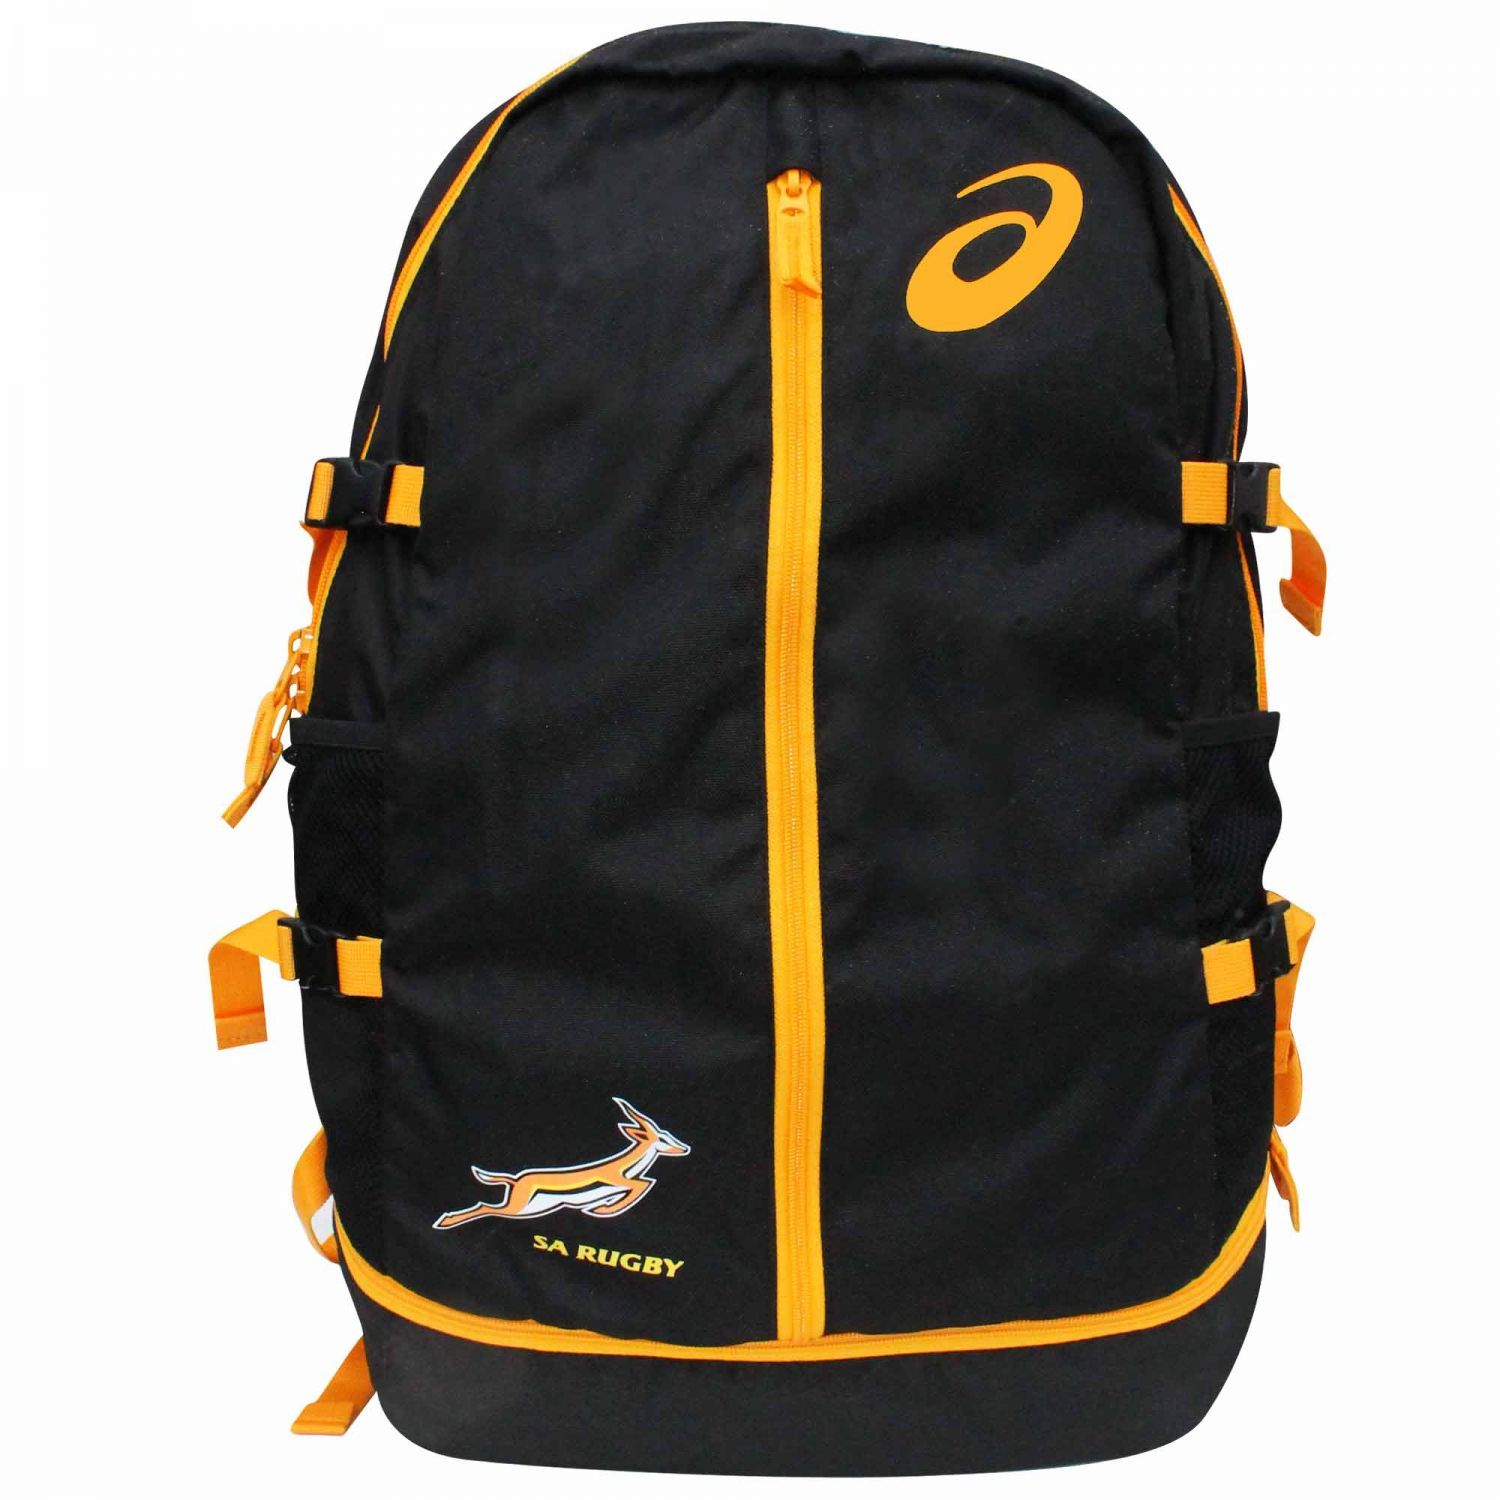 Springboks Official South Africa Rugby Crest Premium Rucksack With Zipped Pockets